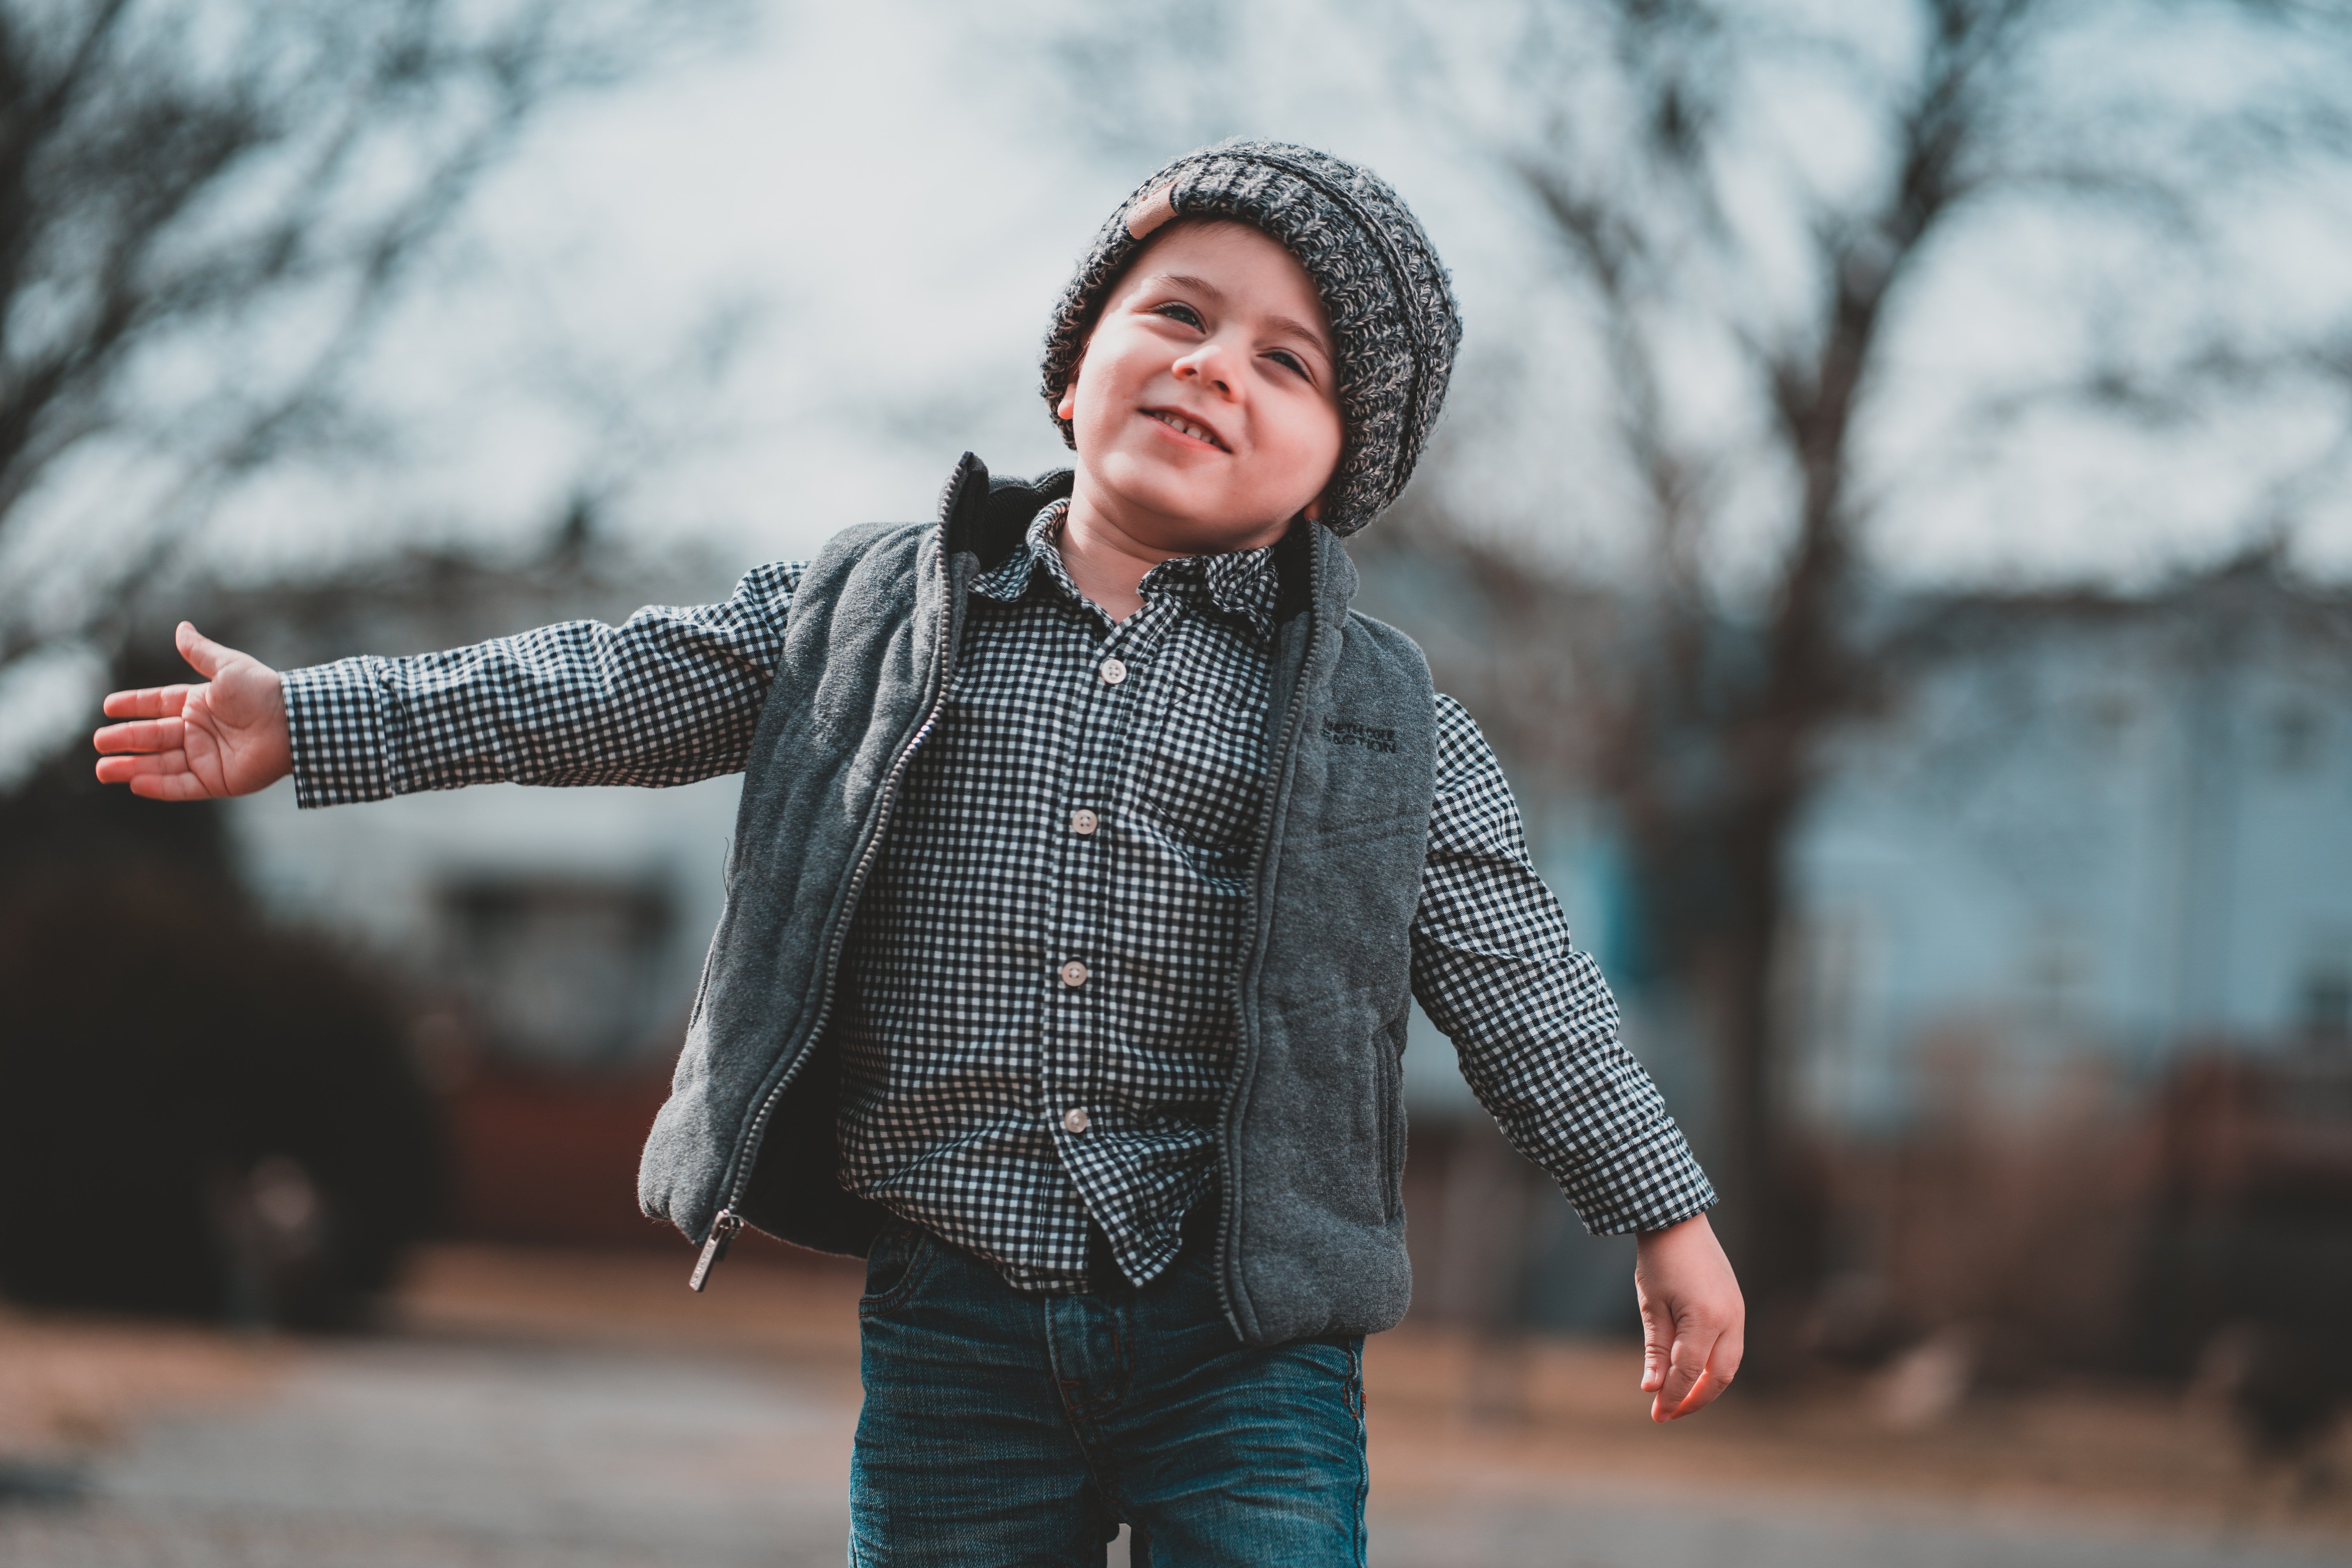 A young boy enjoying in the outdoor. | Source: Pexels